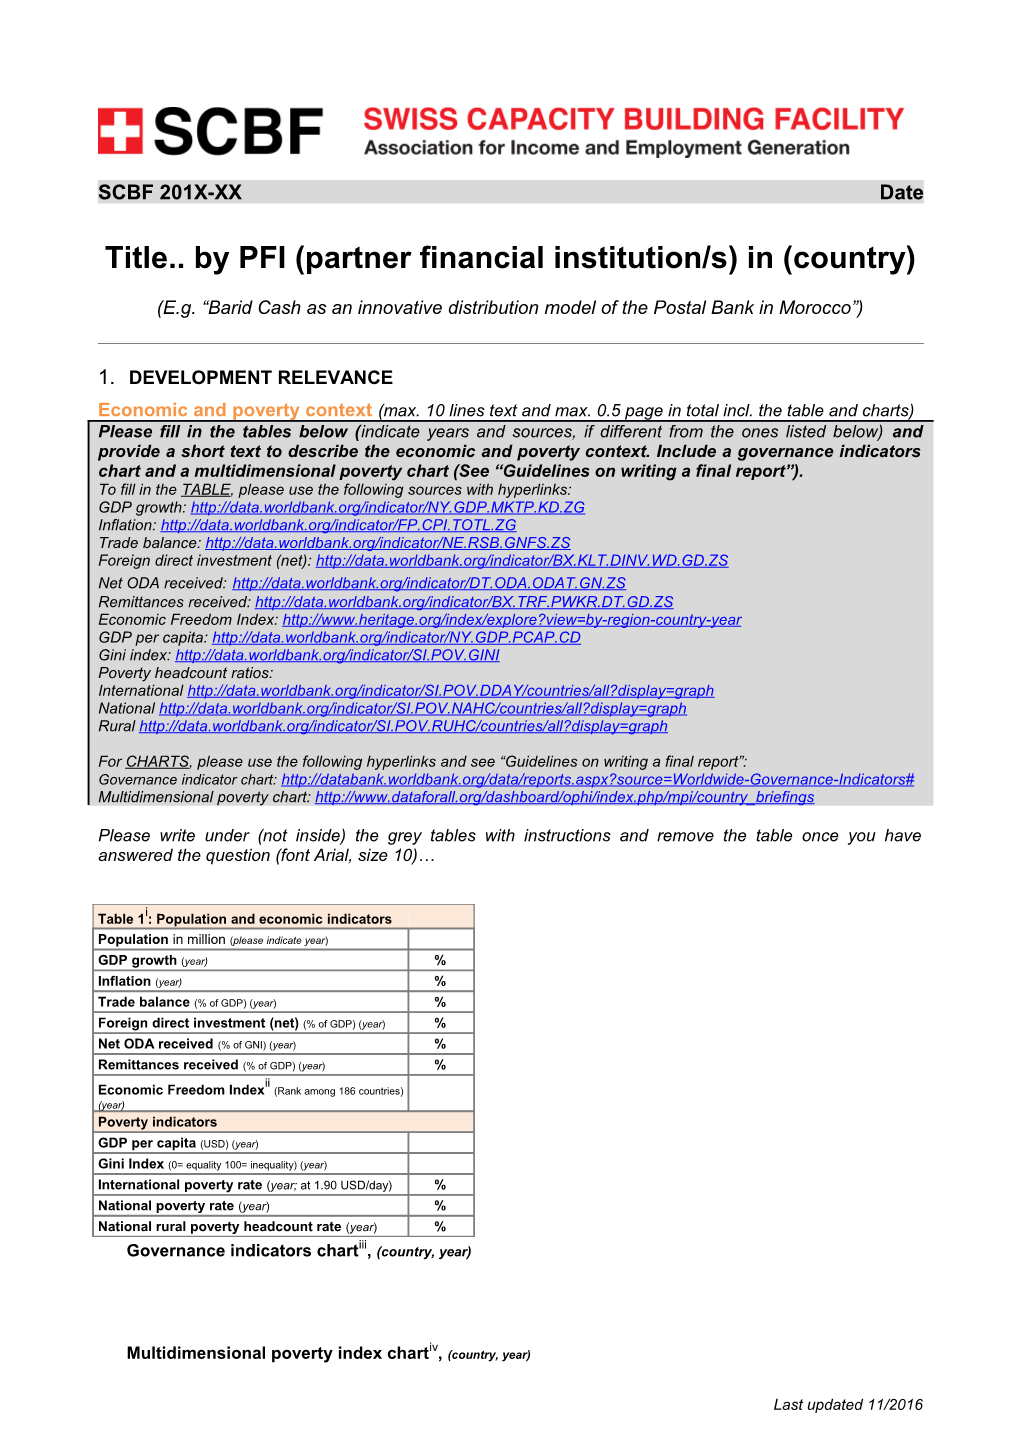 Title by PFI (Partner Financial Institution/S) in (Country)